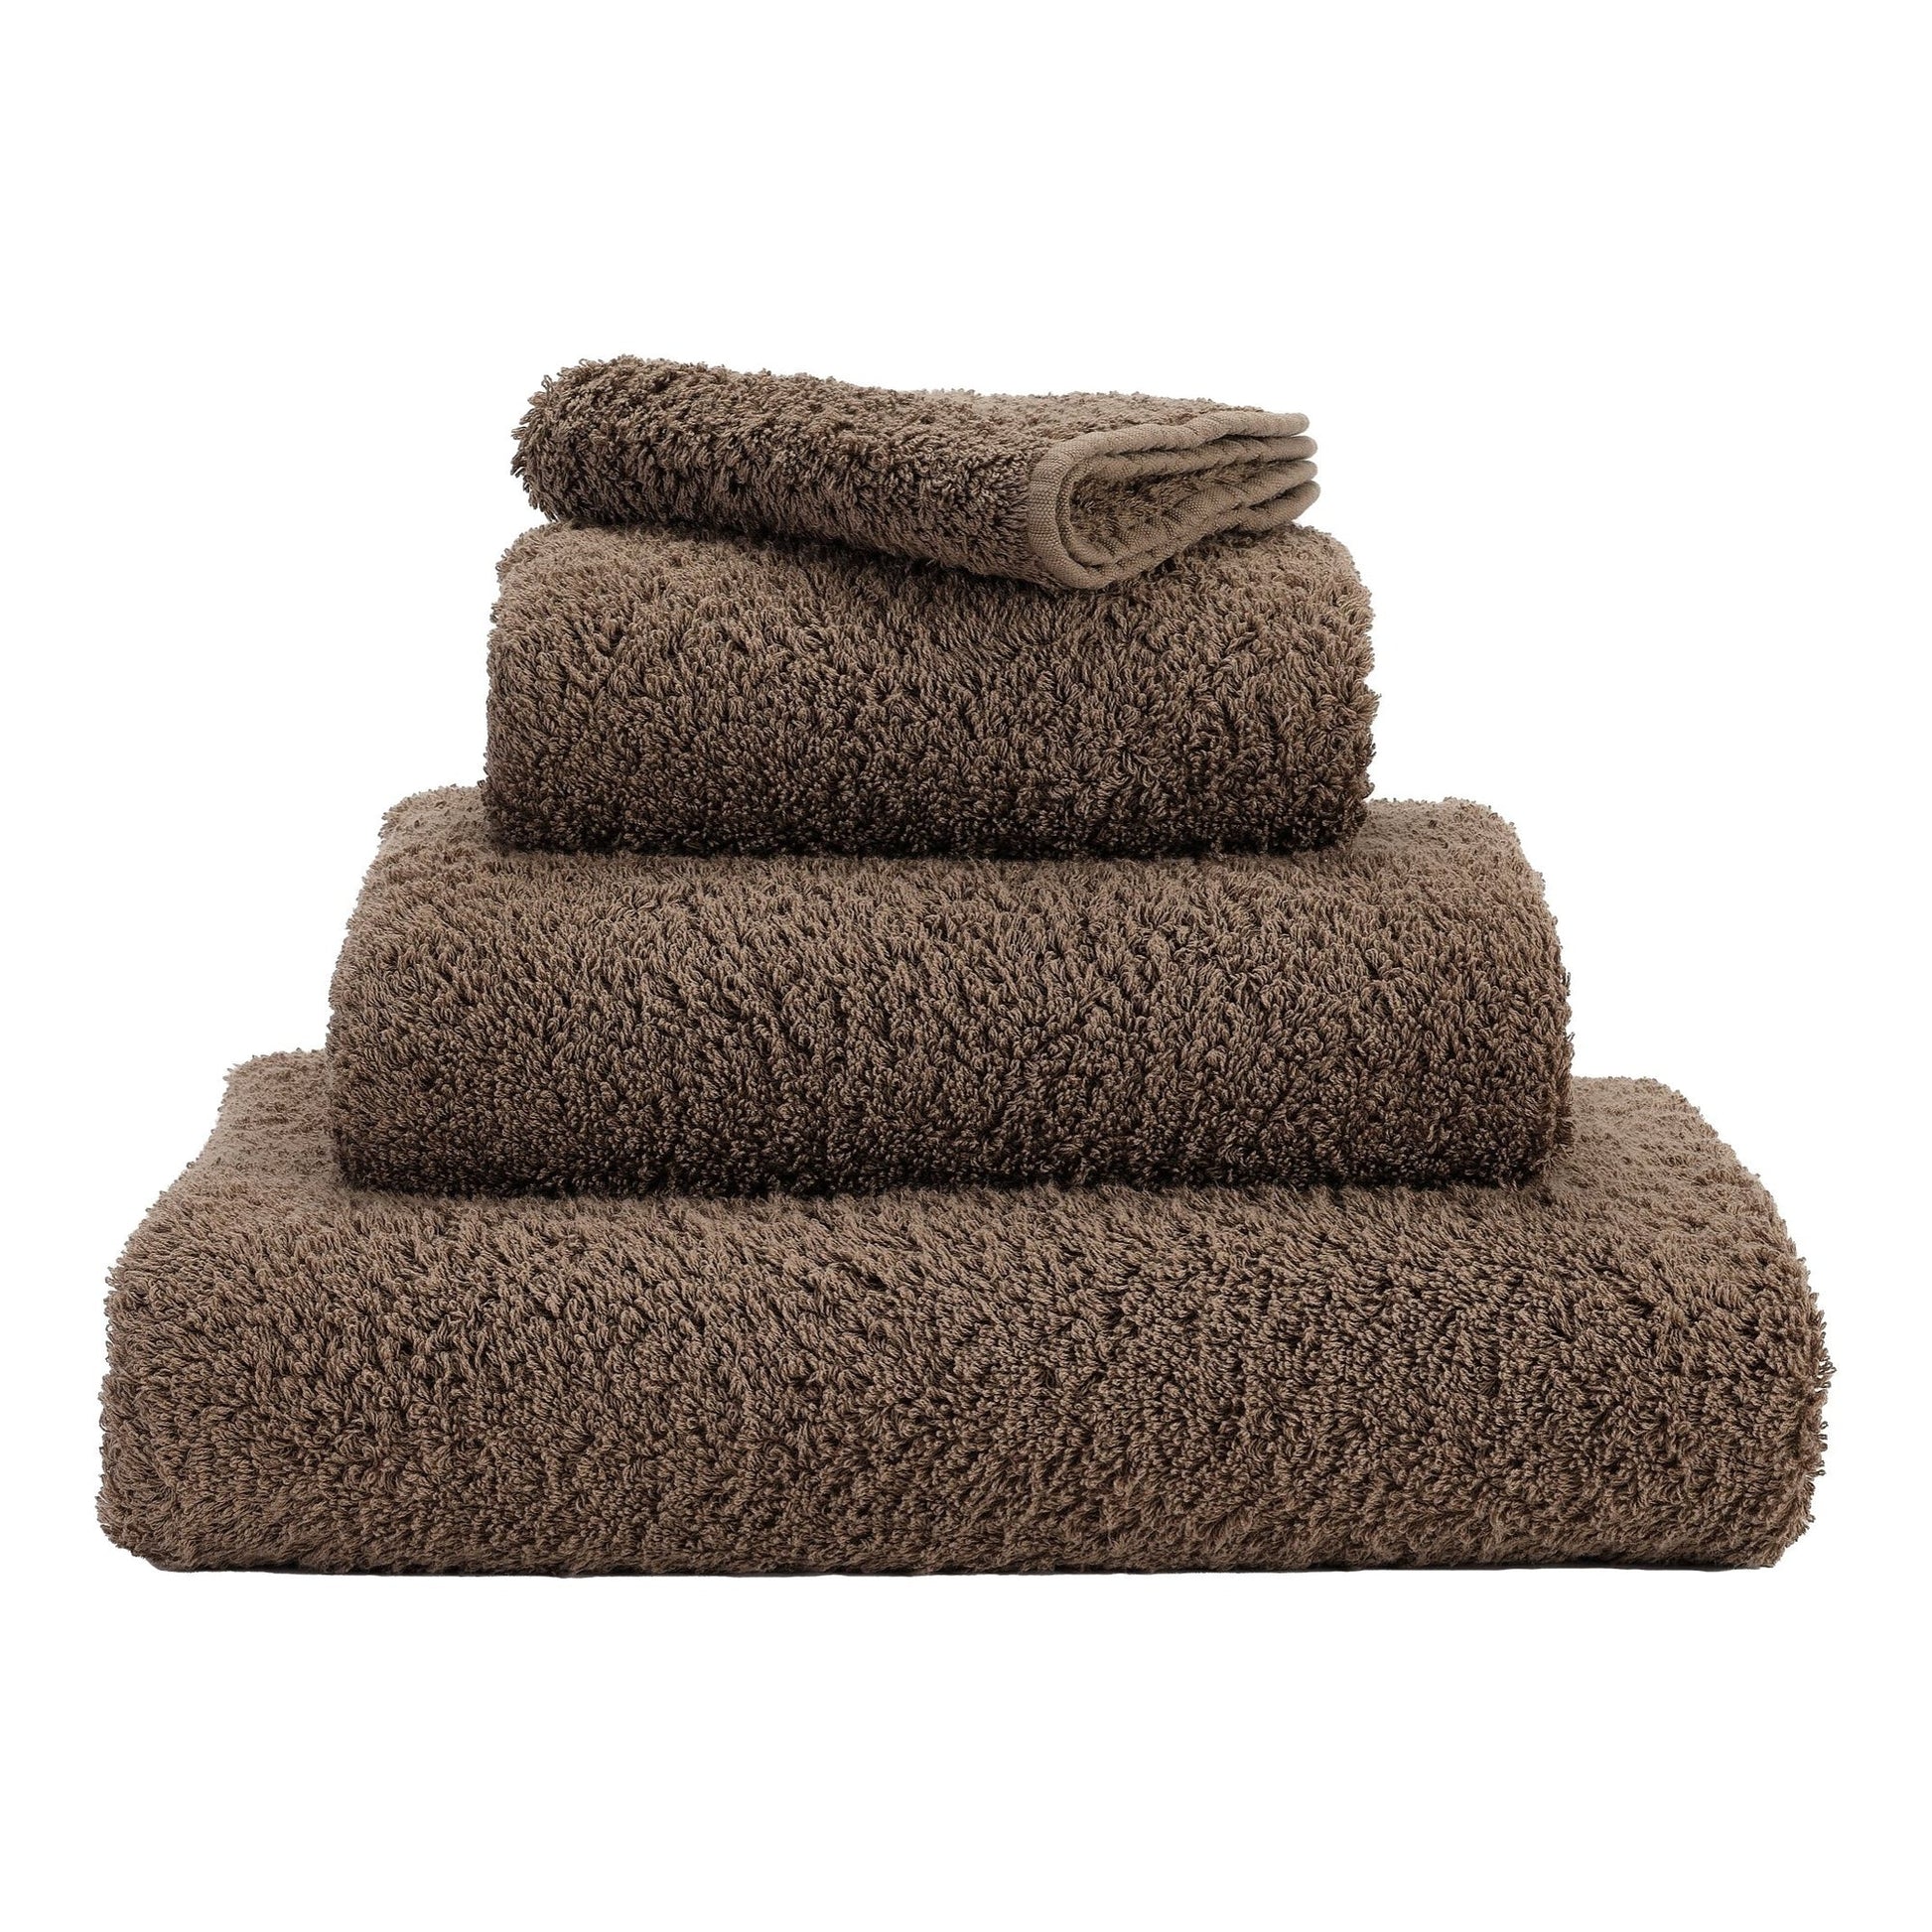 Chic Super Pile Bath Towels by Abyss & Habidecor | 771 Funghi - |VESIMI Design| Luxury and Rustic bathrooms online